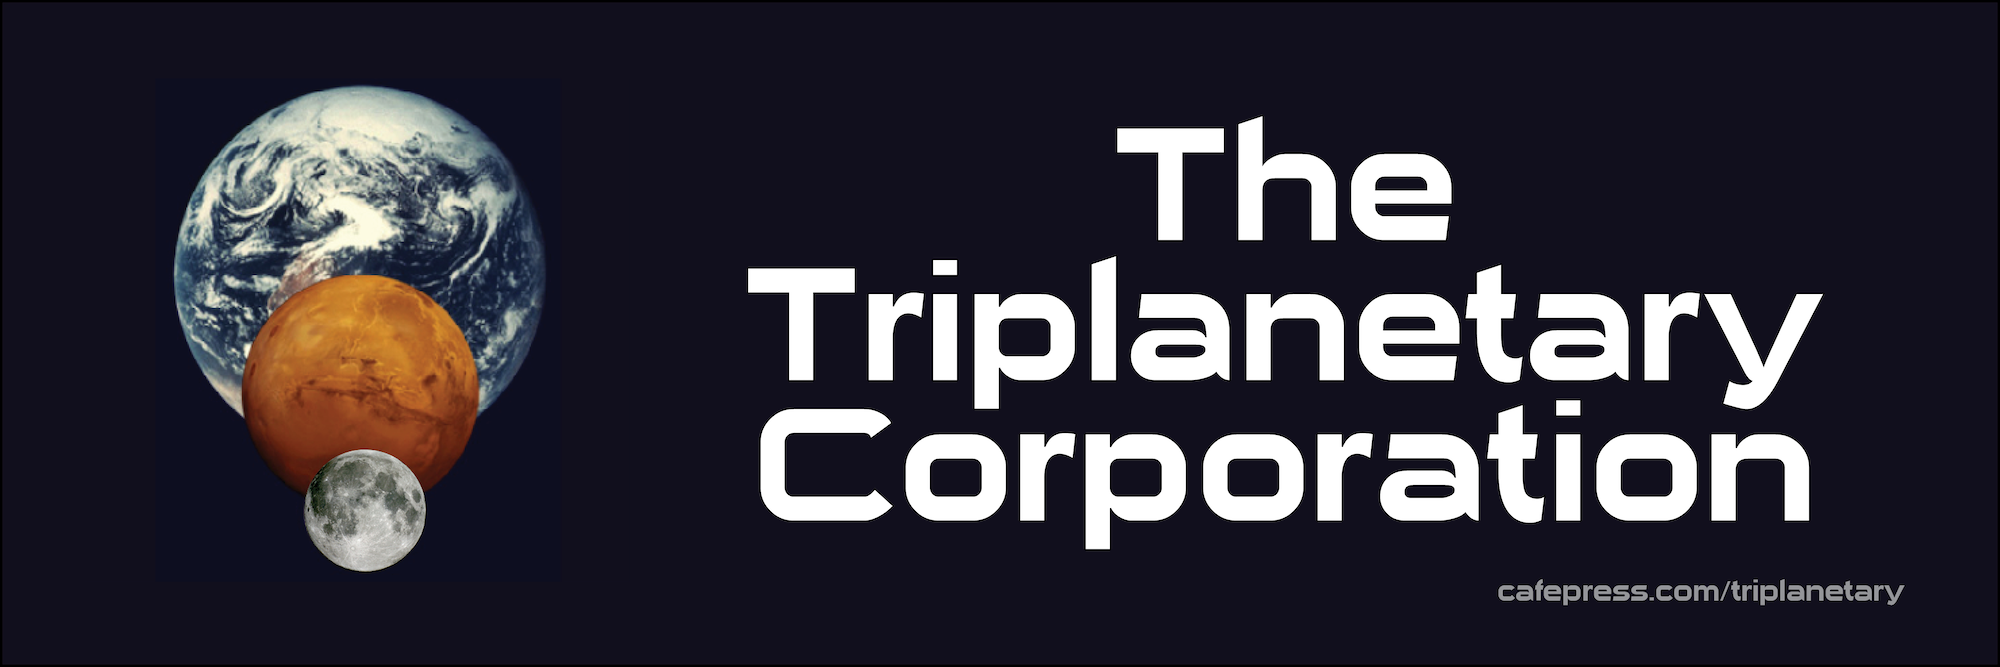 Black background with images of Earth, Mars, and Moon with Triplanetary Corporation logo